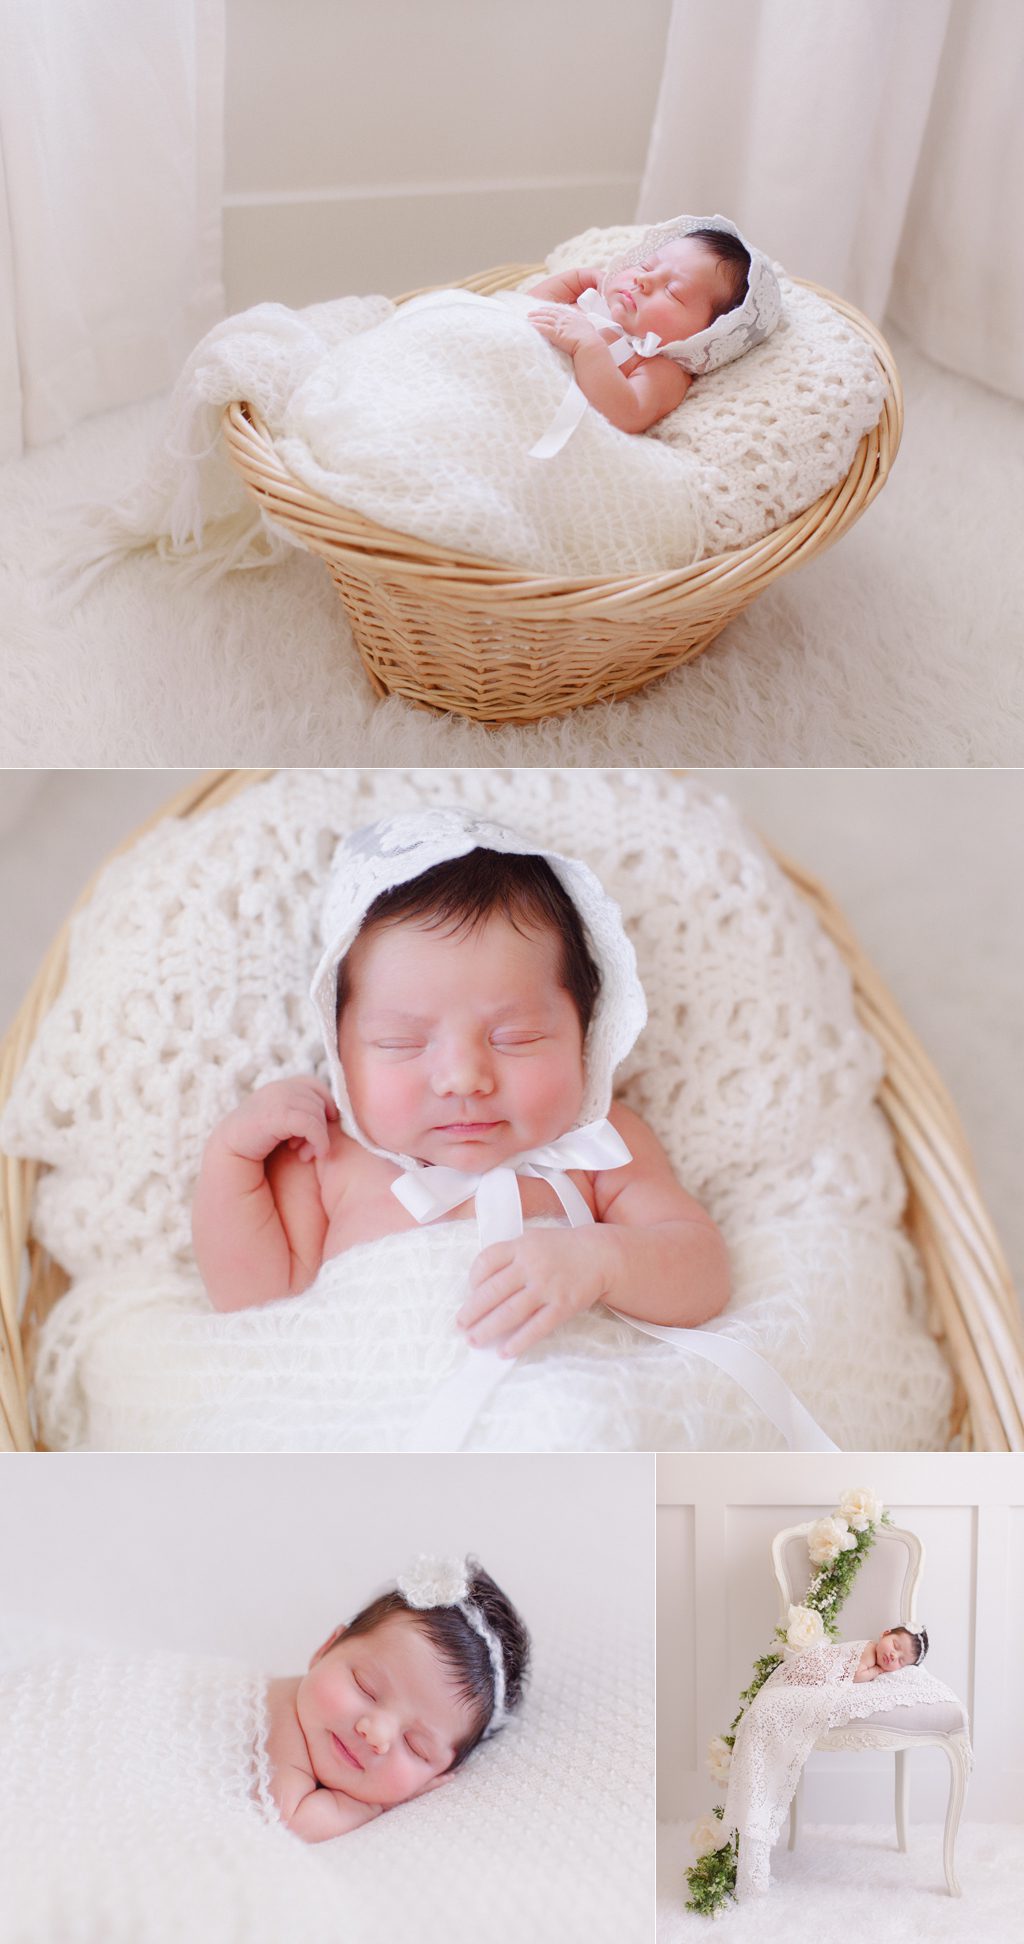 Best newborn photography in Athens, GA of infant girl.